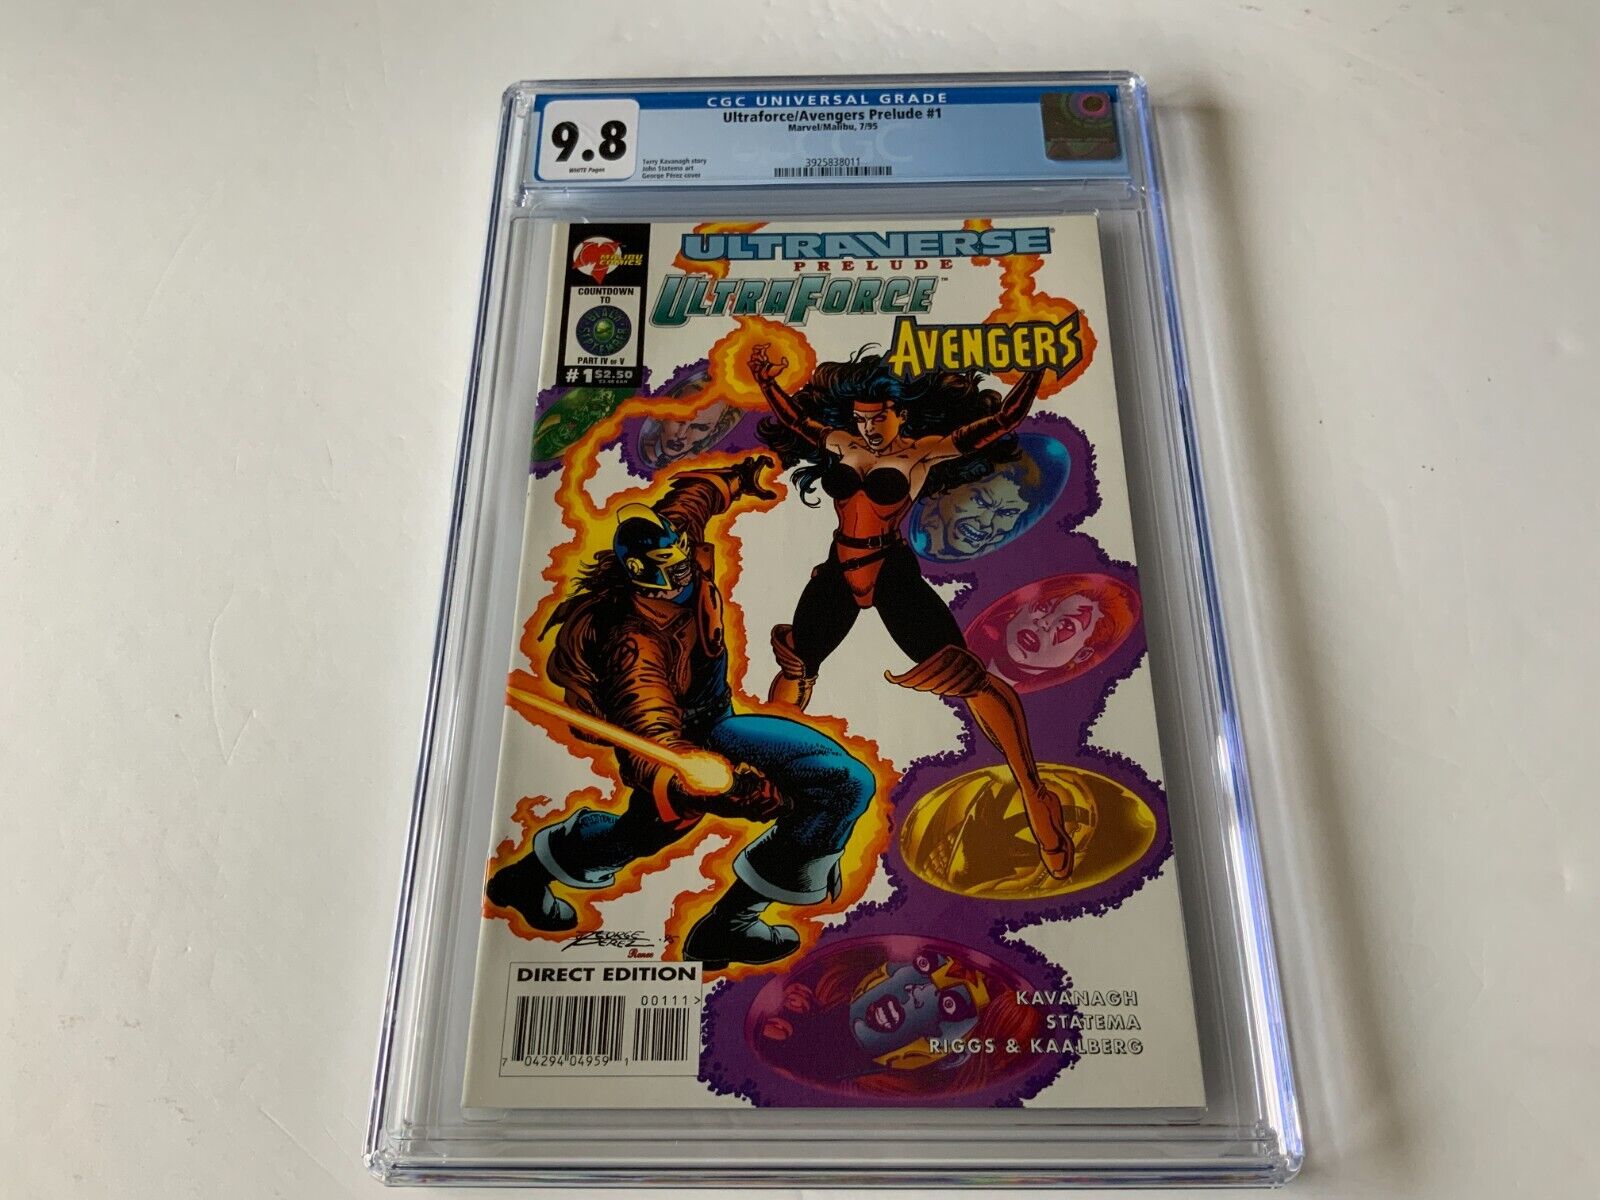 ULTRAFORCE AVENGERS PRELUDE 1 CGC 9.8 WHITE PAGES BLACK KNIGHT MARVEL COMIC 1995